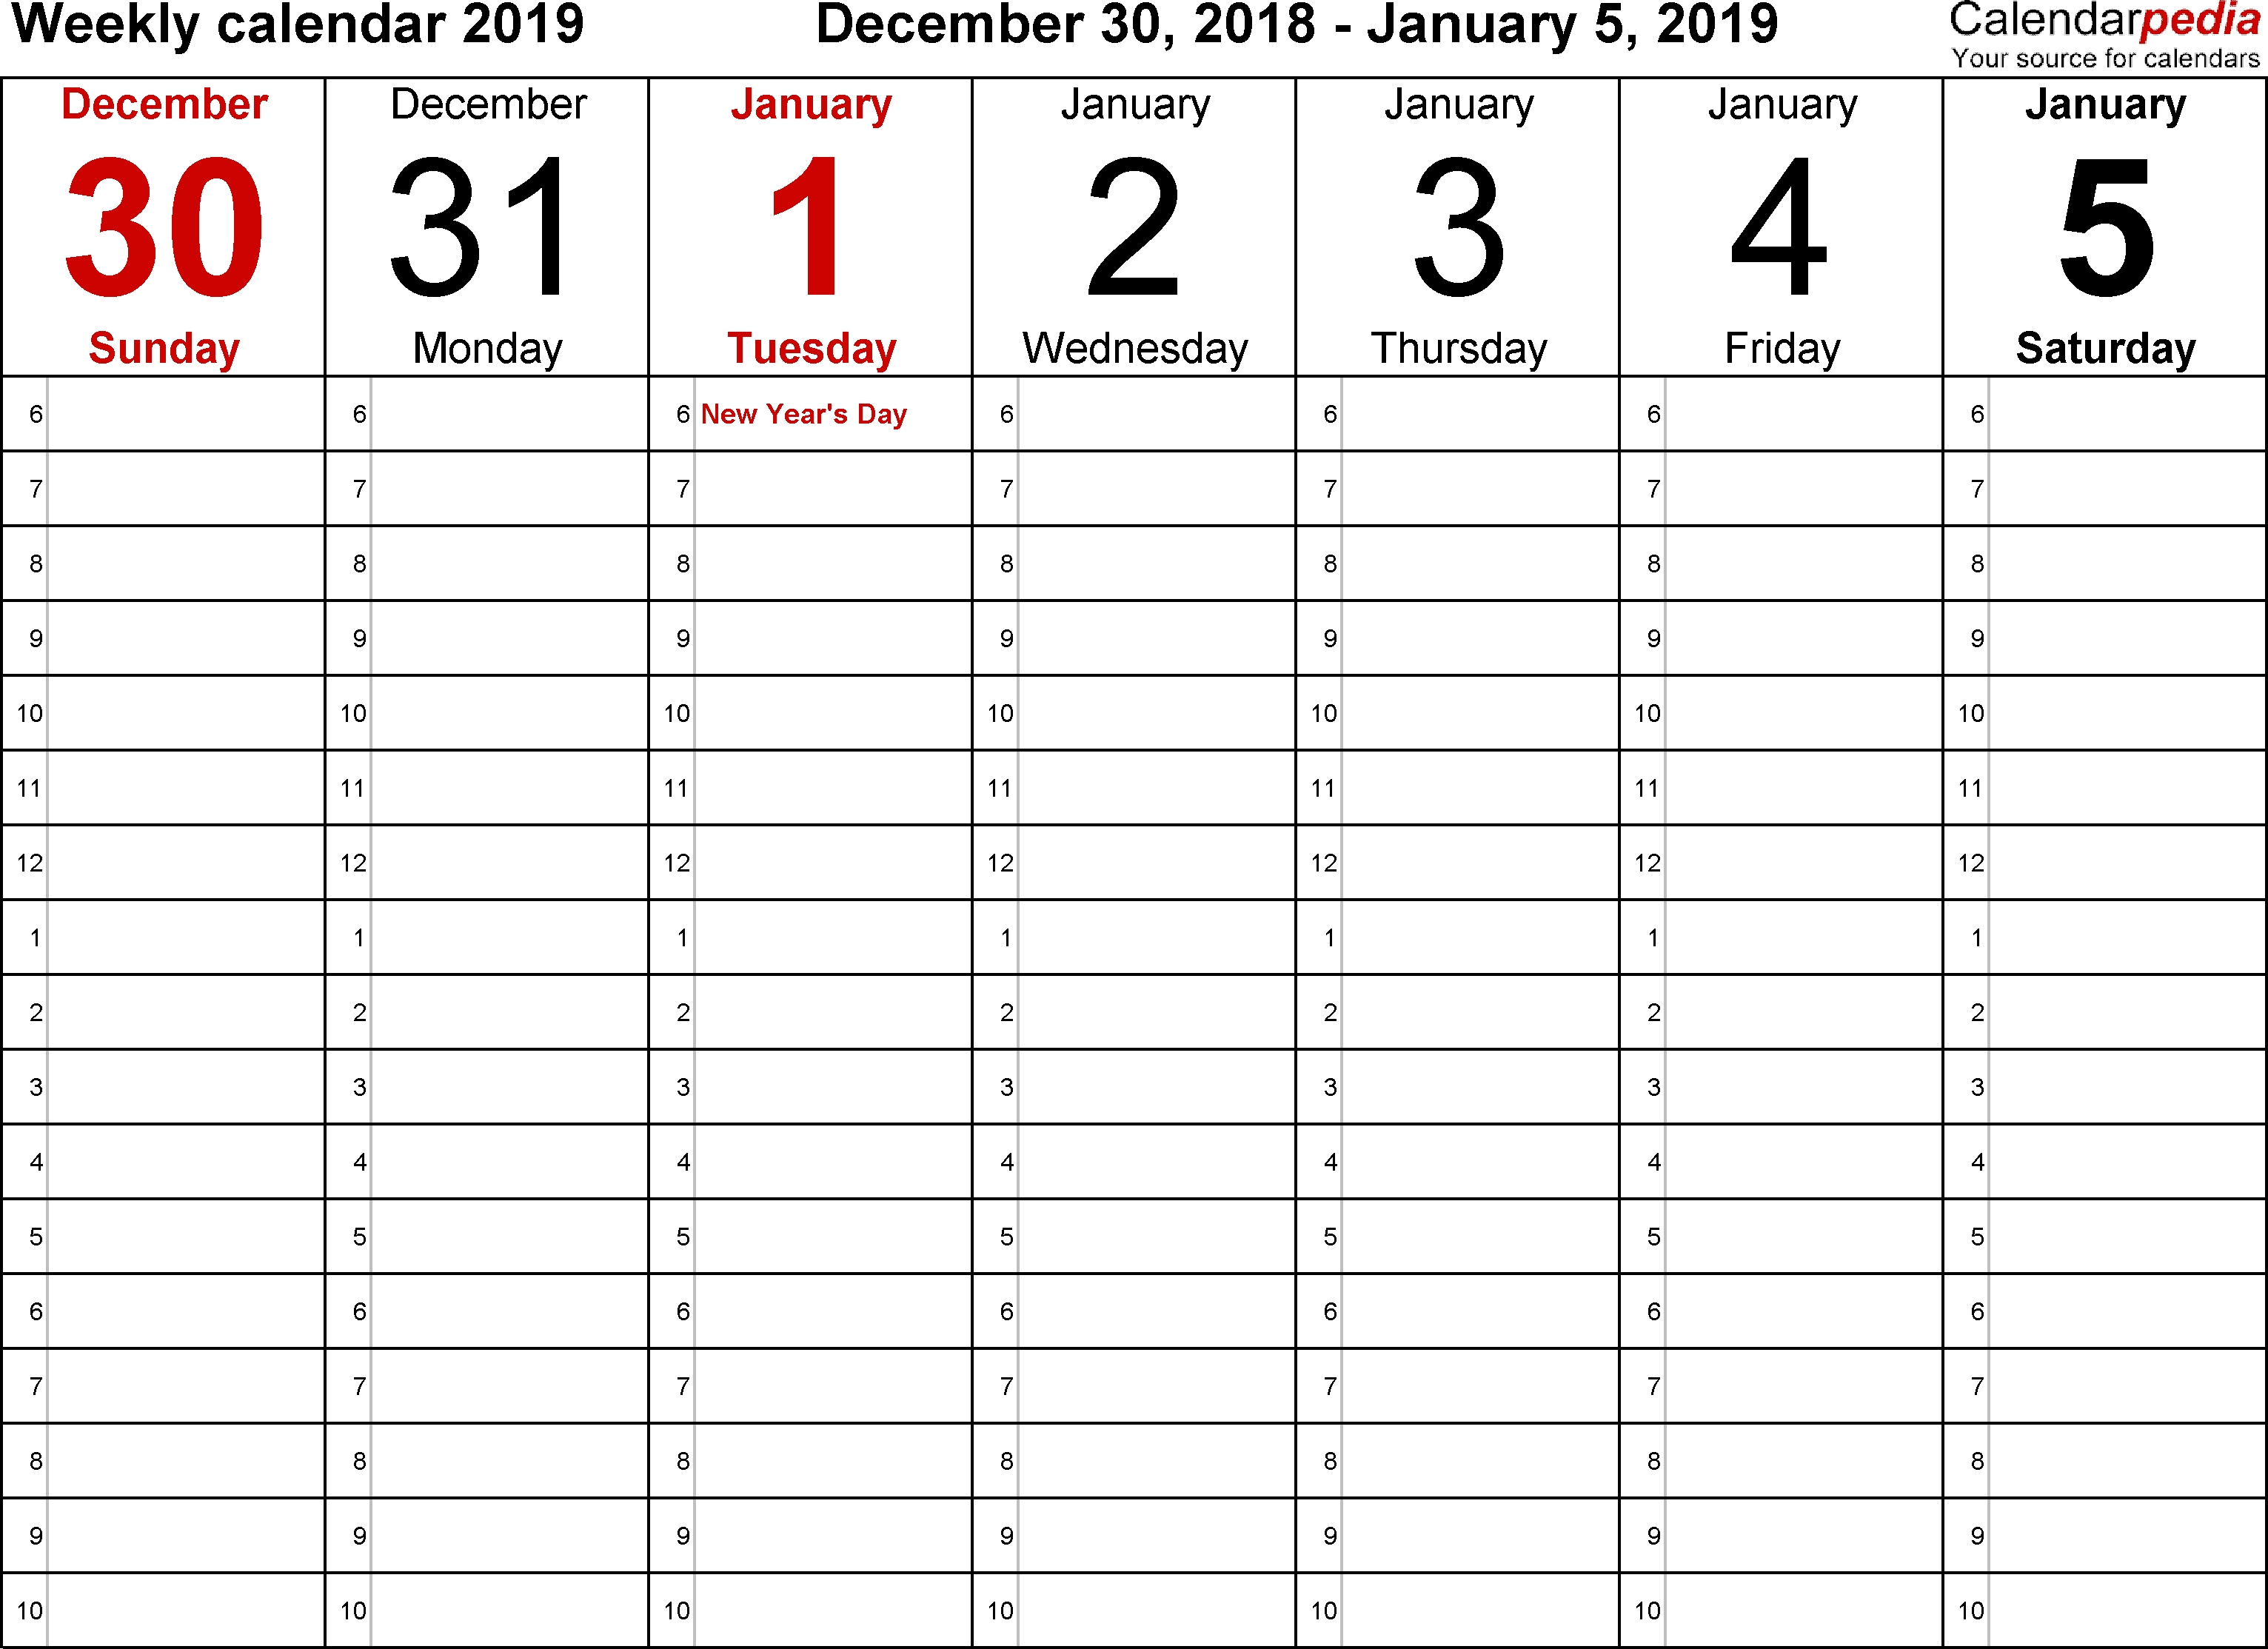 Weekly Calendar 2019 For Pdf - 12 Free Printable Templates Calendar Template Date And Time